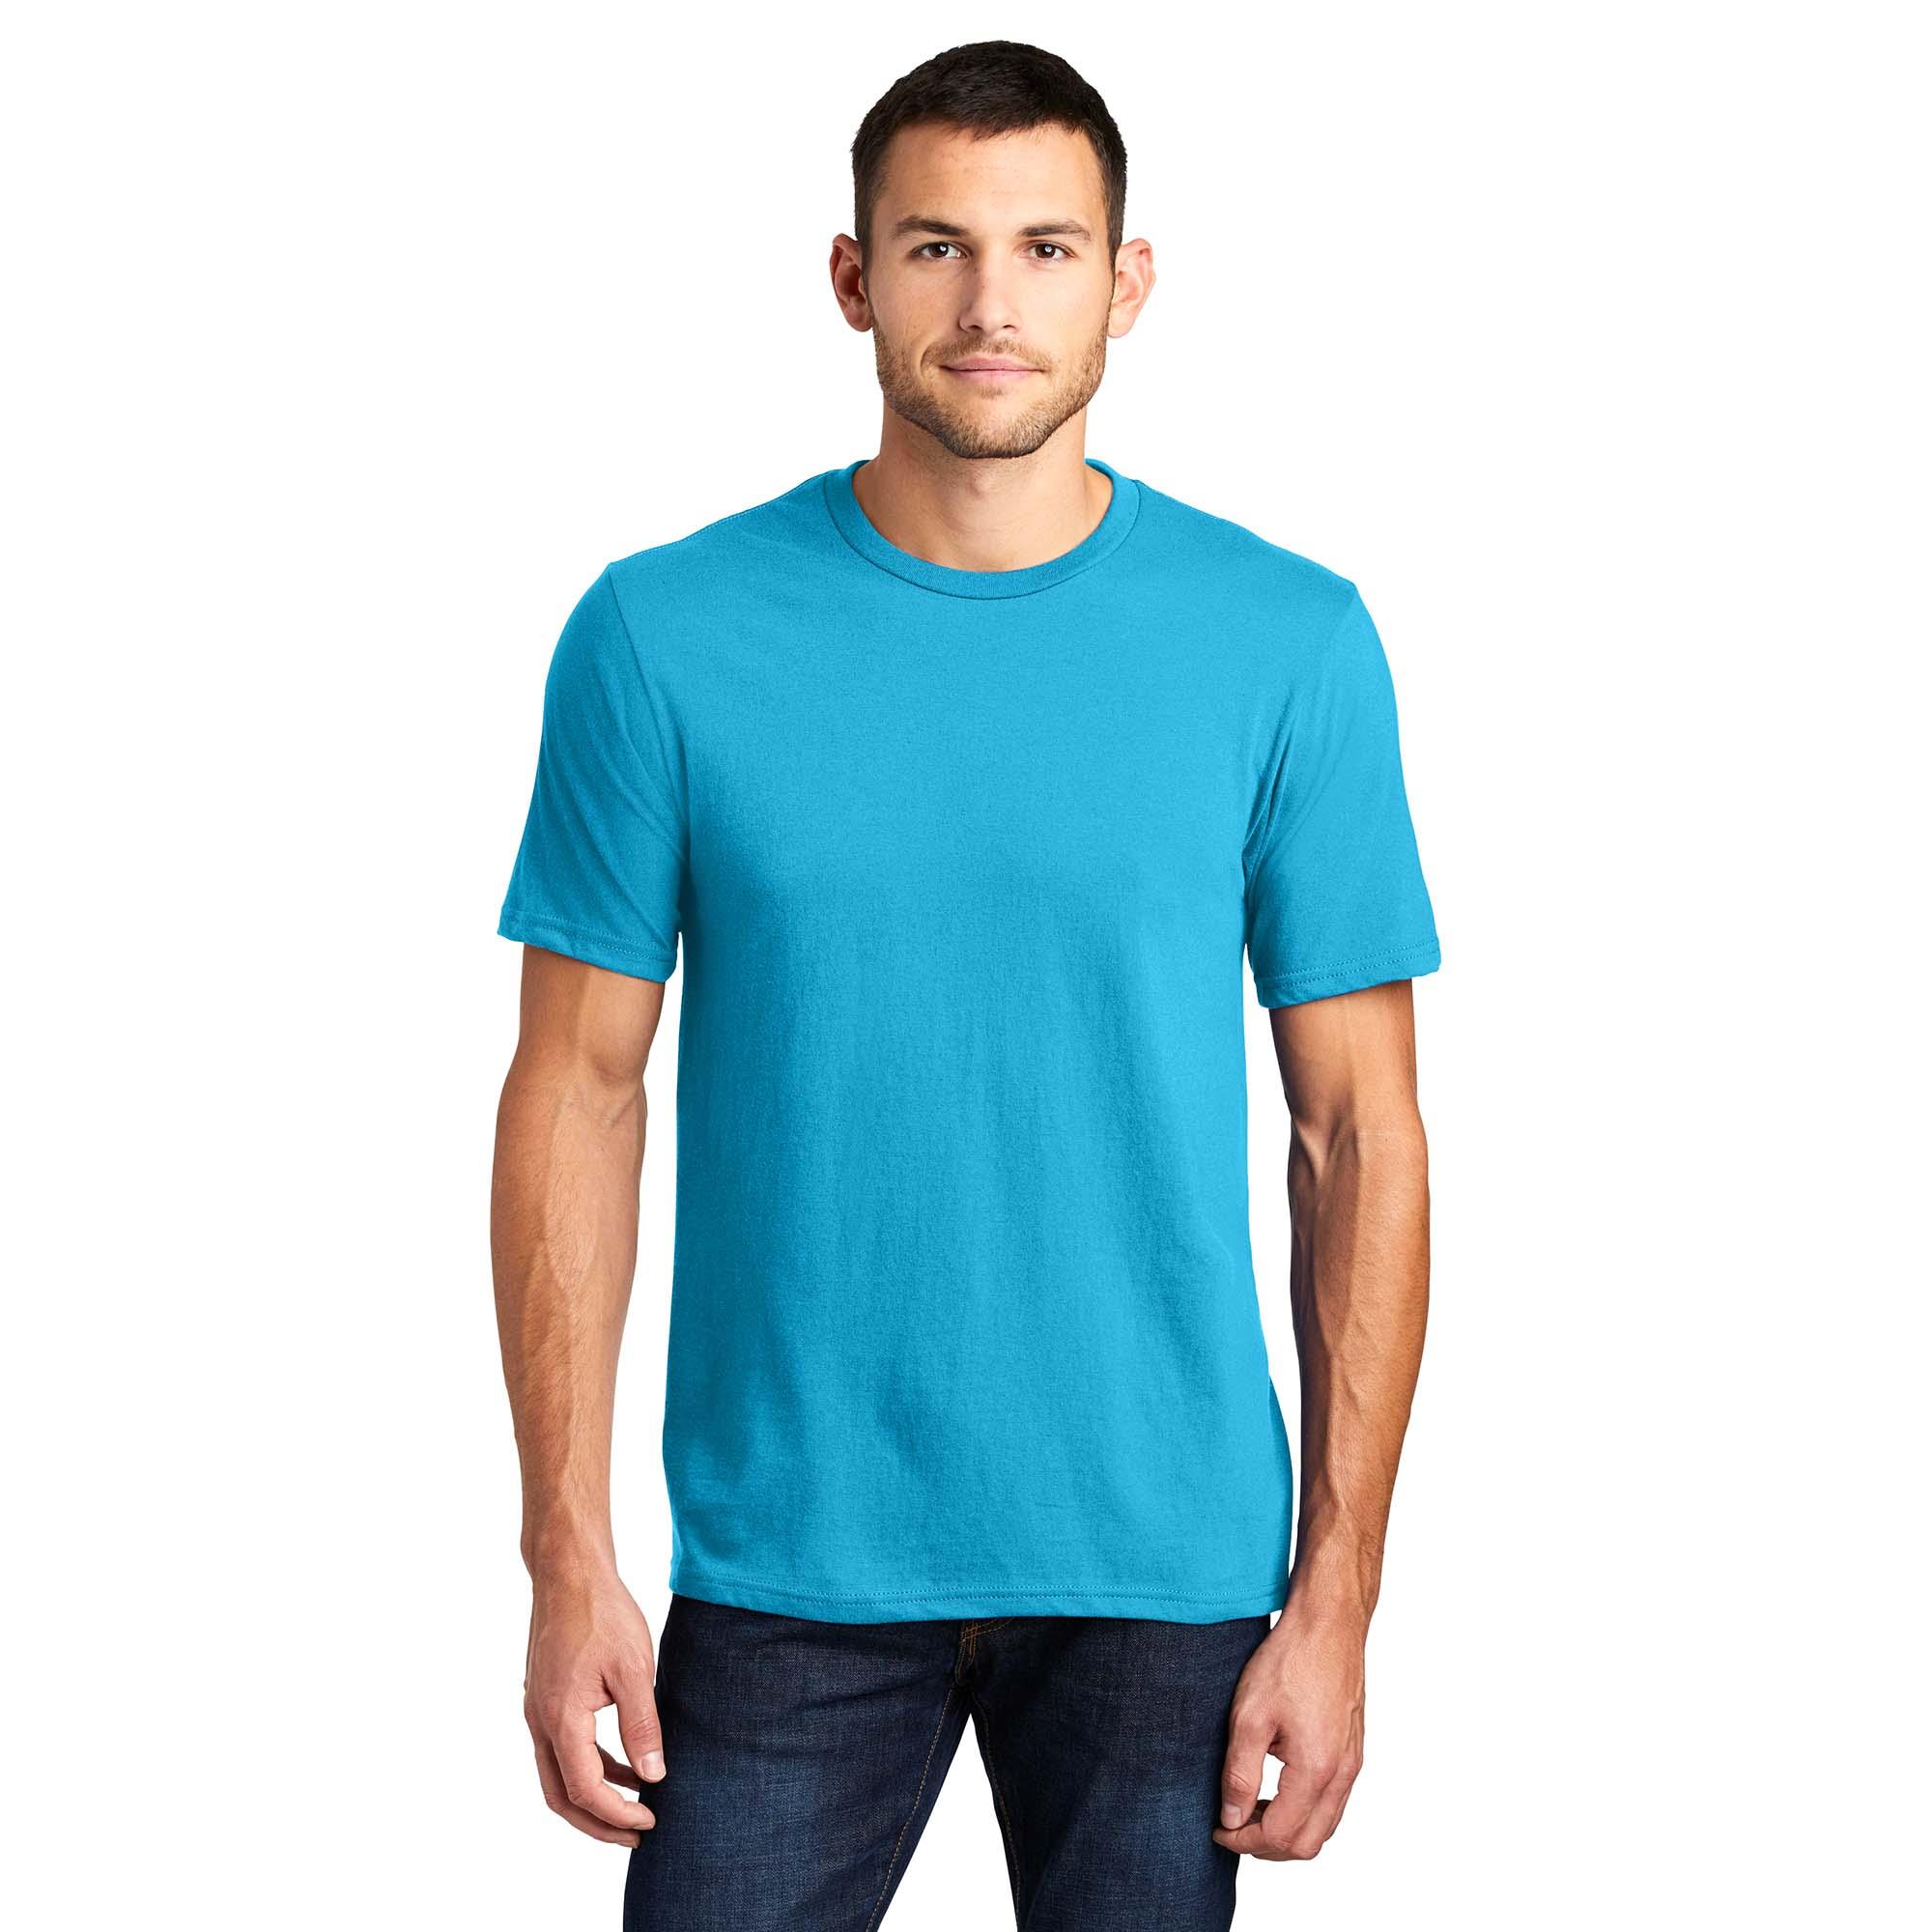 District DT6000 Very Important Tee - Light Turquoise | Full Source